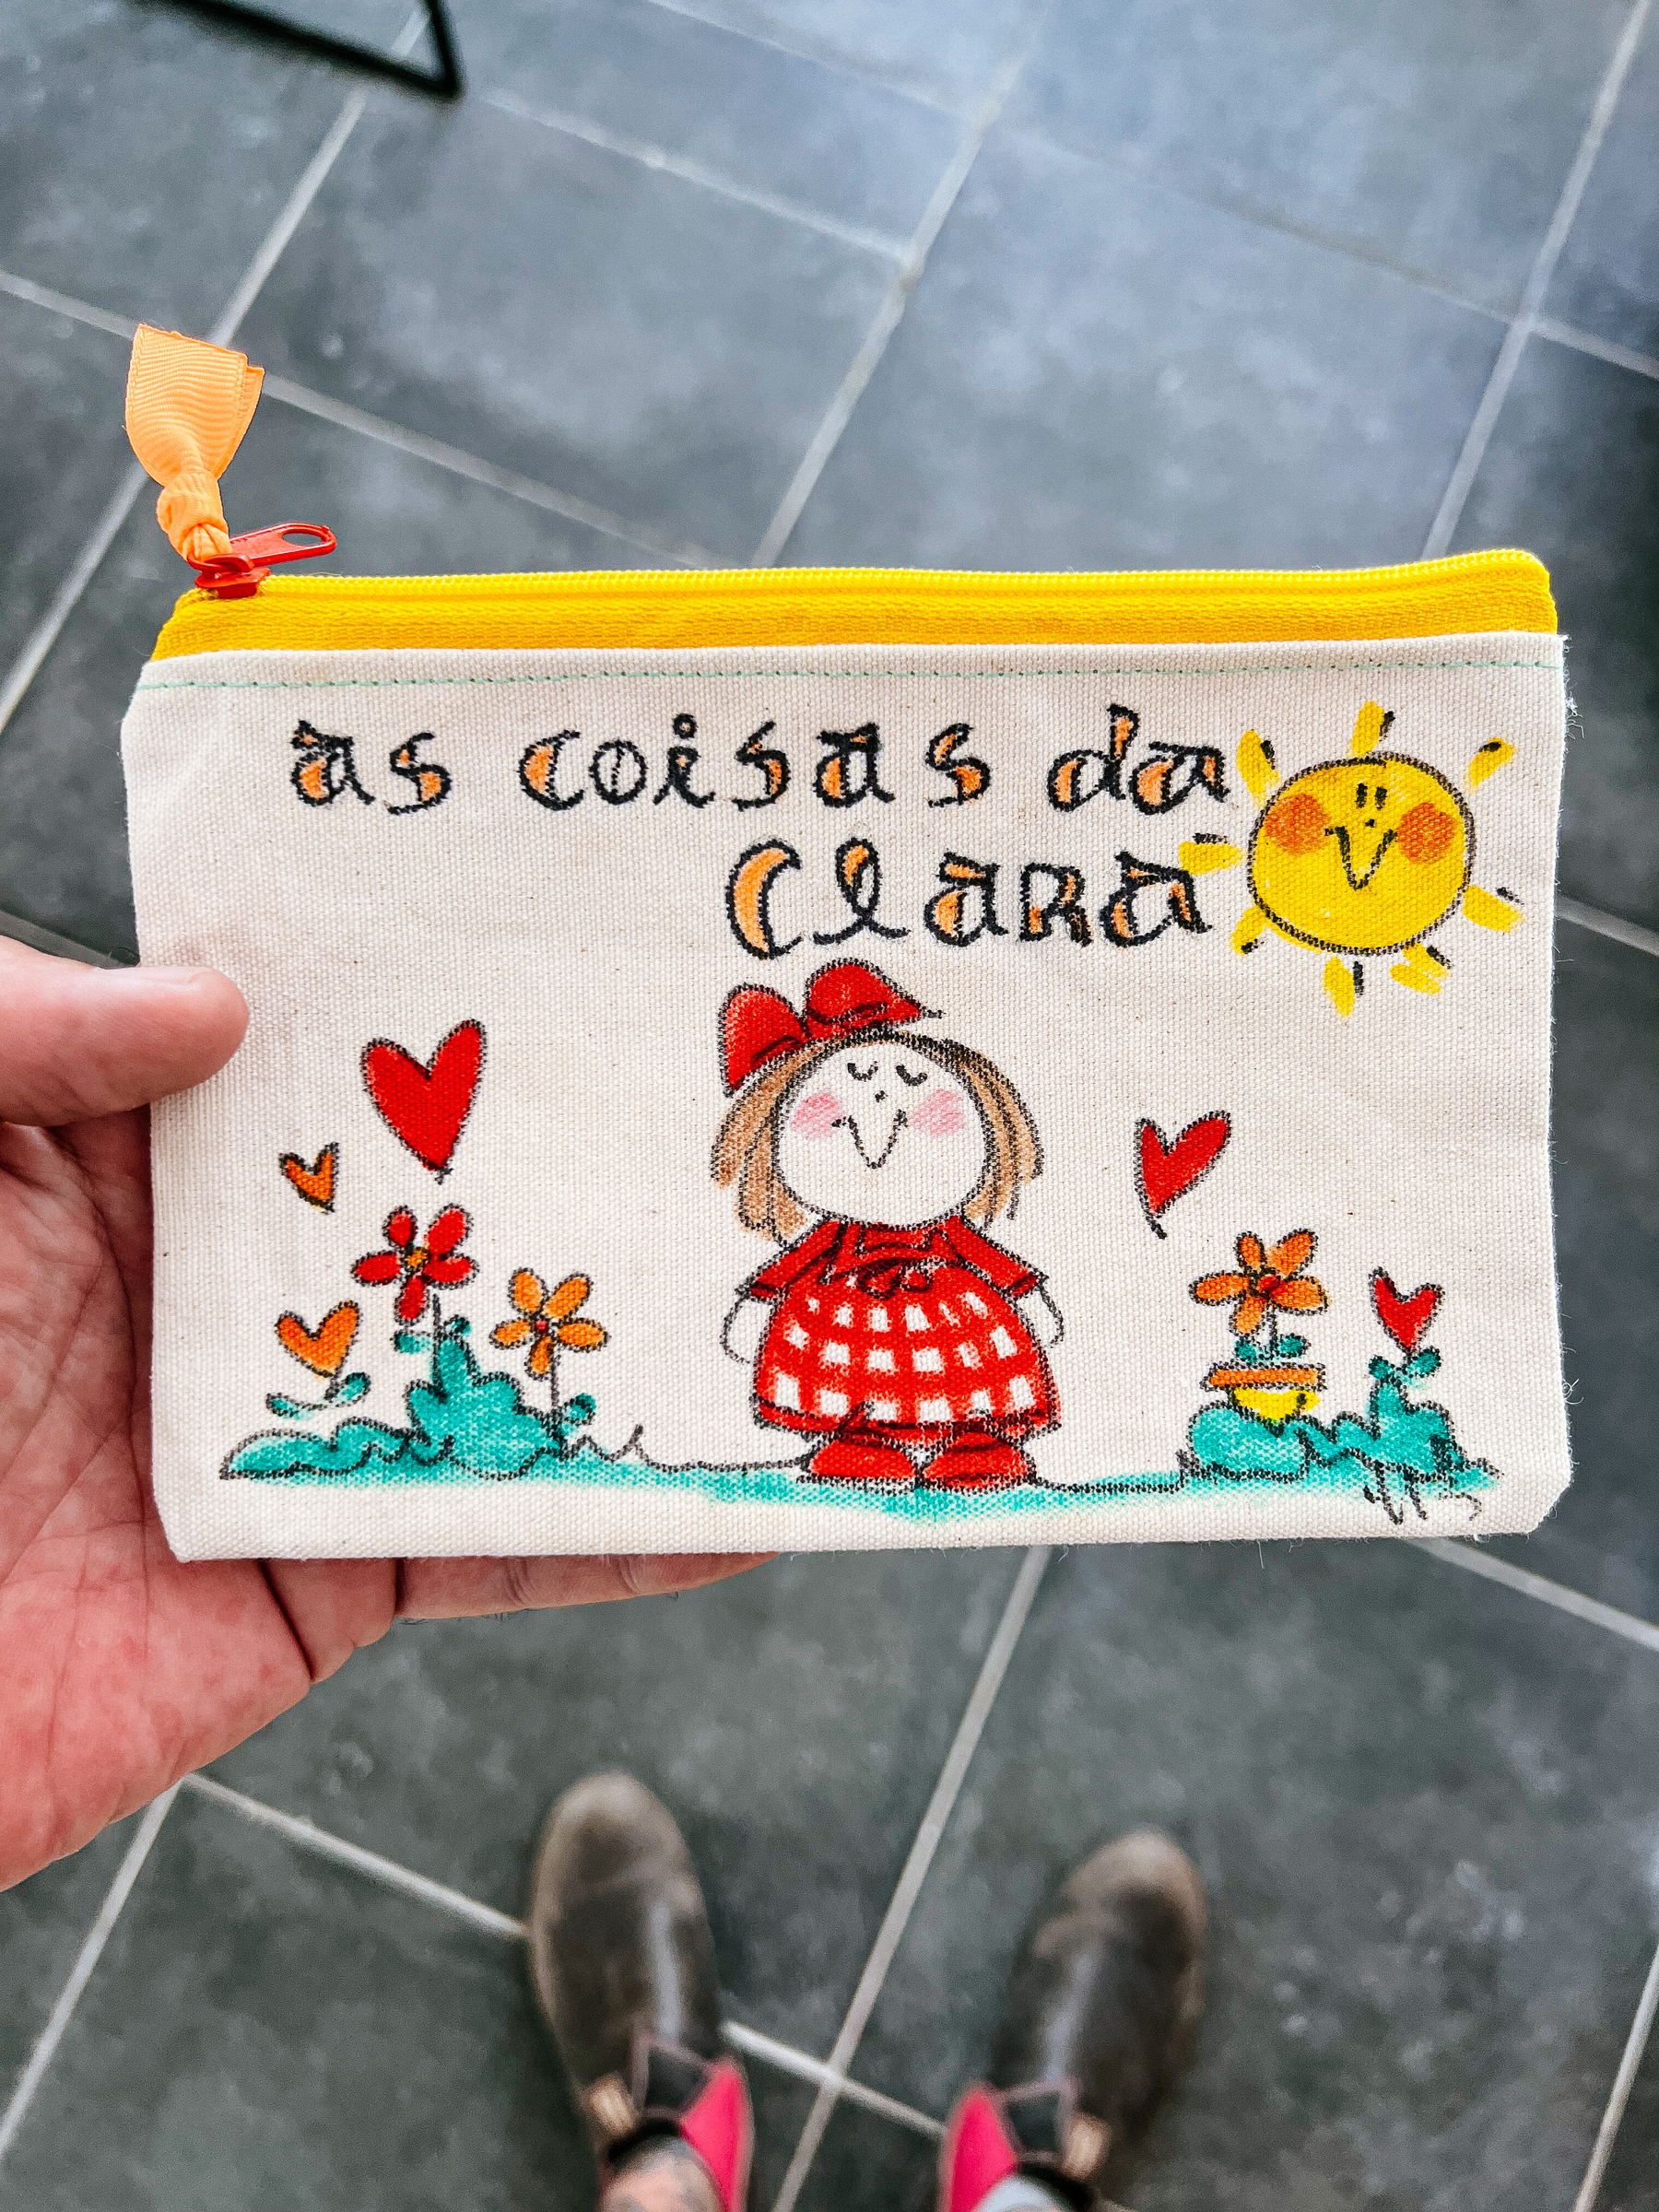 a purse with “Clara’s things” written on it